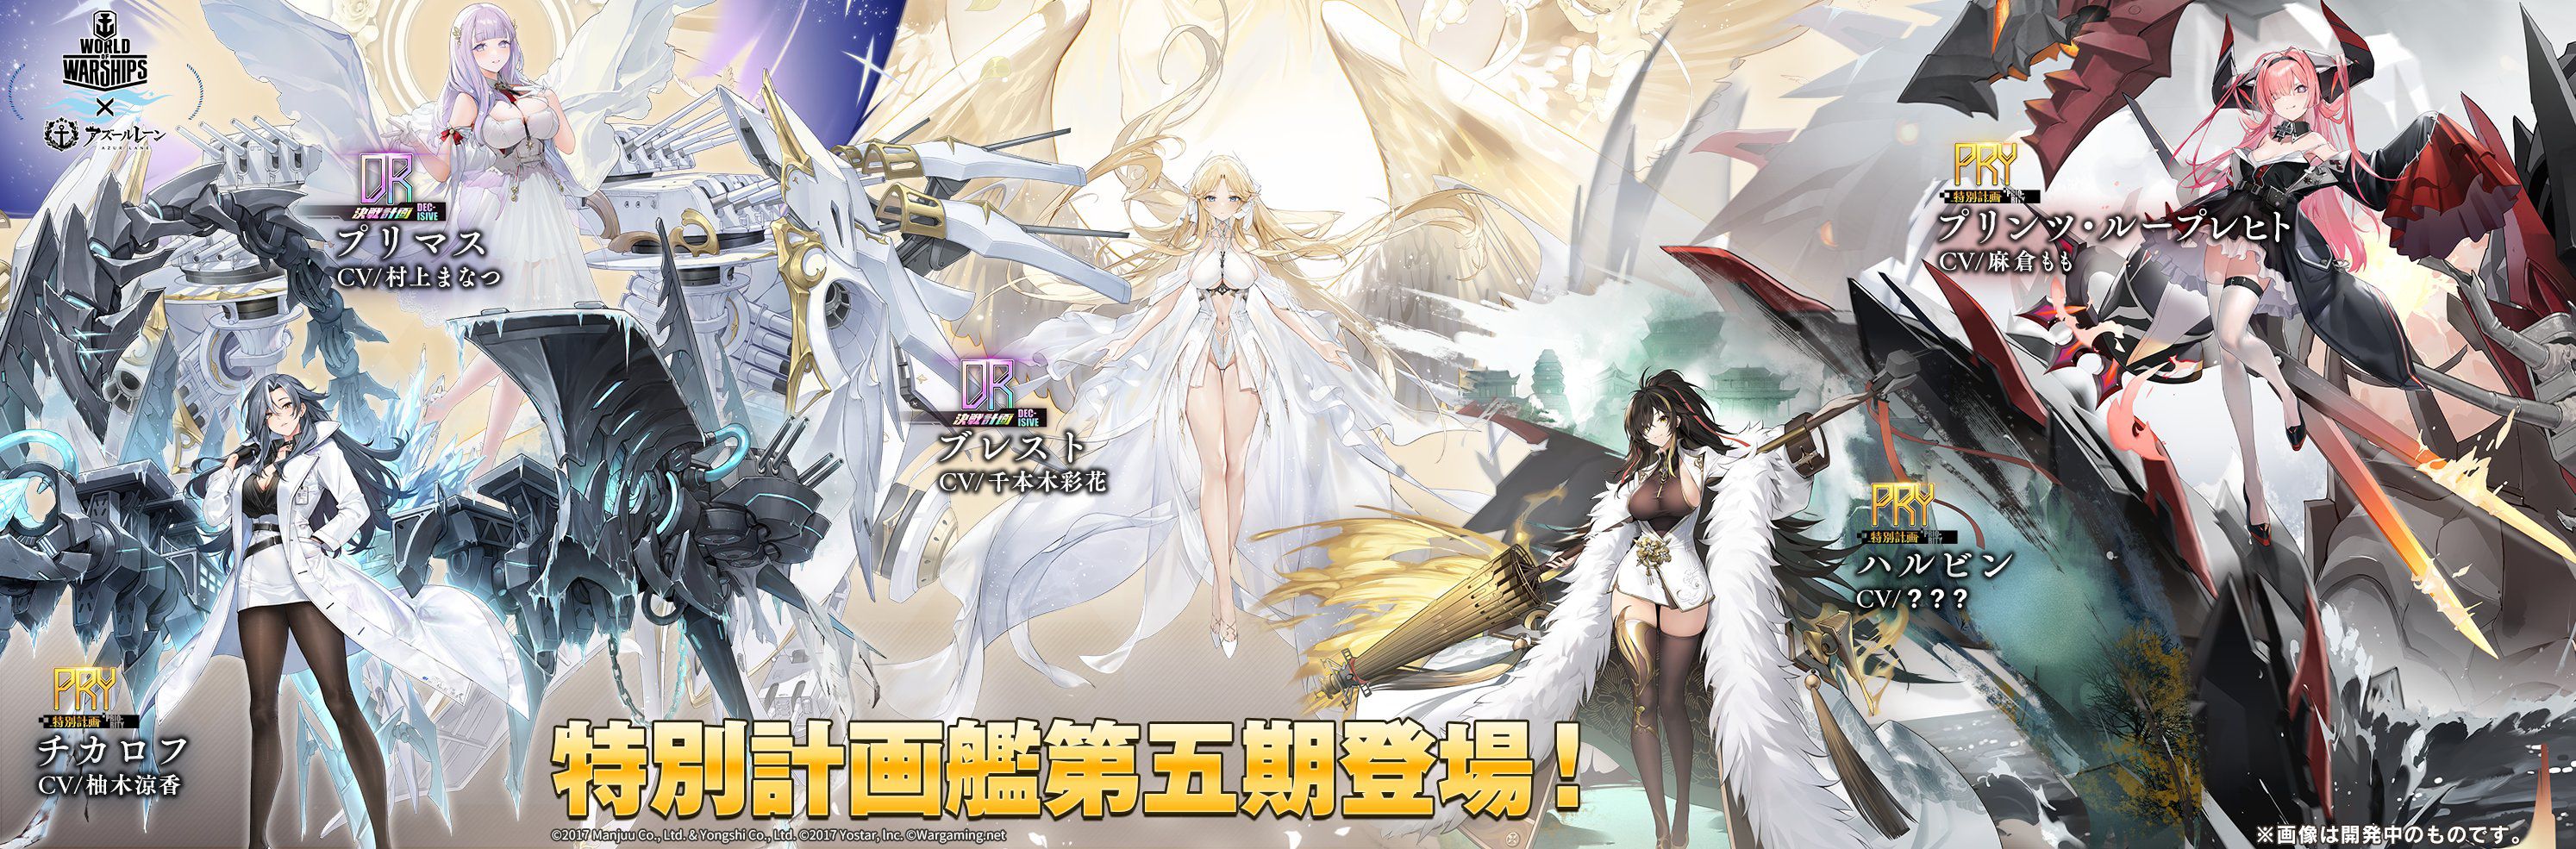 "Azure Lane" Erotic new character with outrageous erotic chimuchi boobs and super high leg dos kebe clothes 7